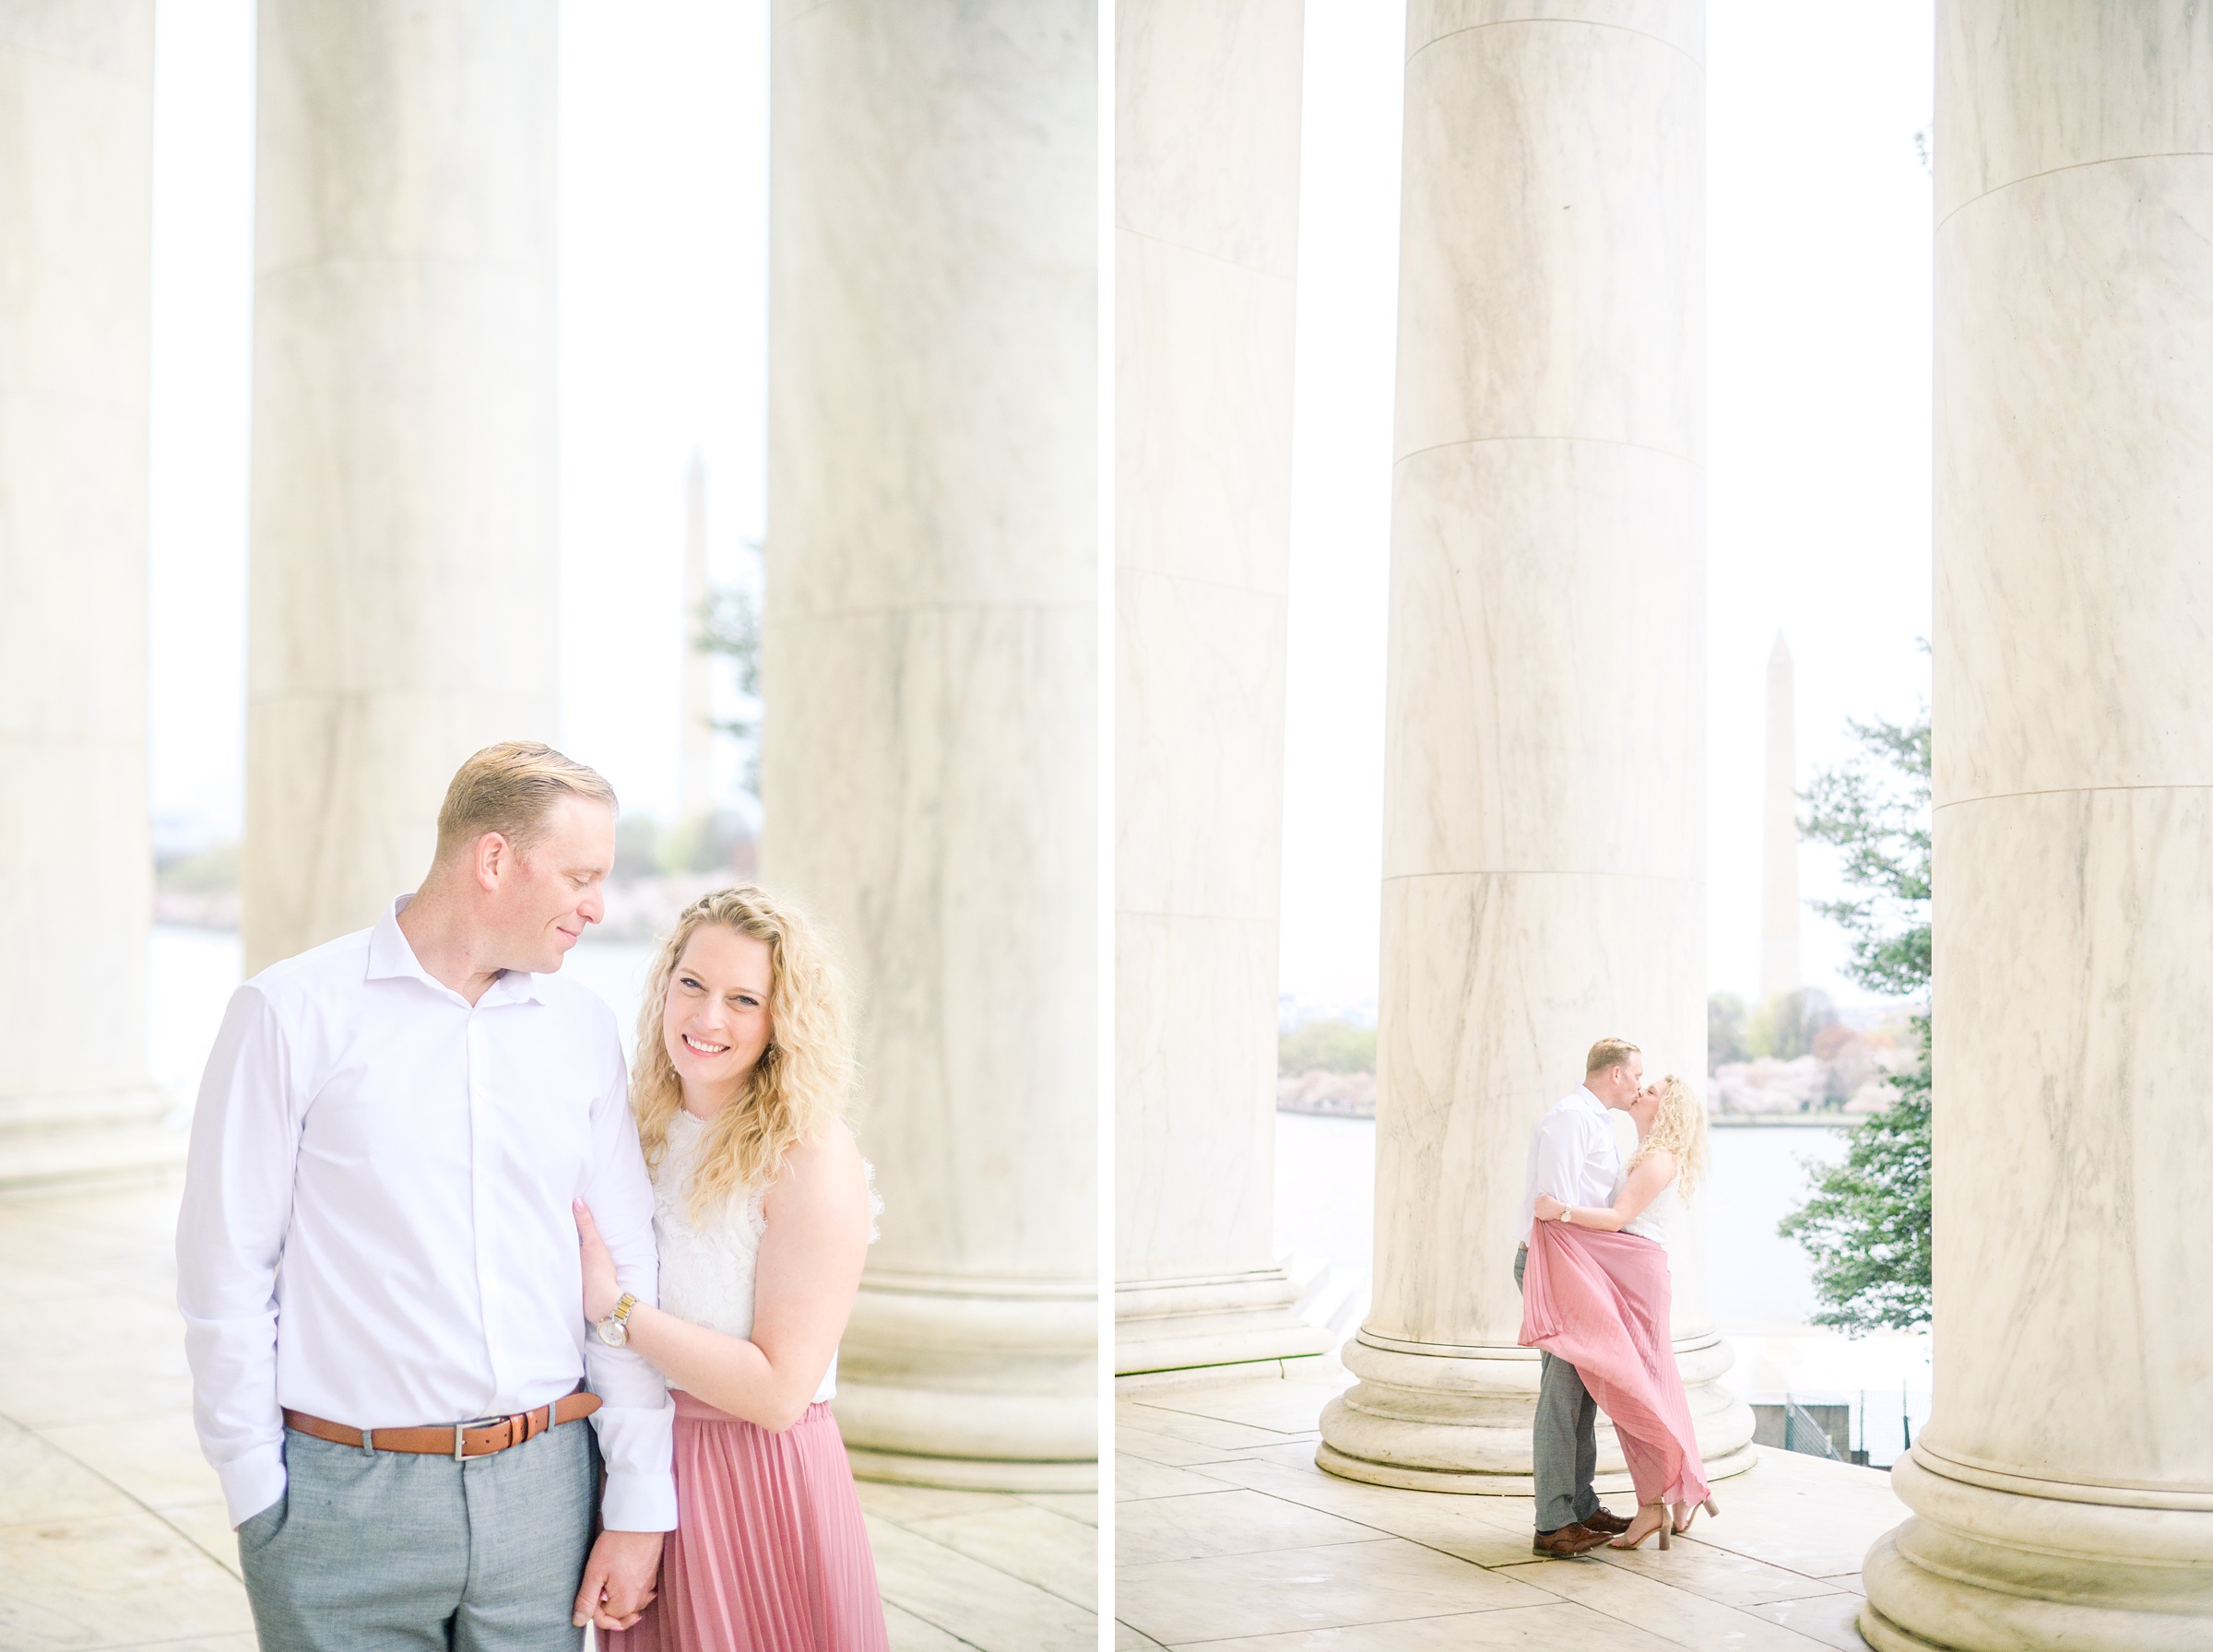 Anniversary portrait session at the Jefferson Memorial featuring the Washington DC Cherry Blossoms. Photographed by Baltimore Photographer Cait Kramer Photography